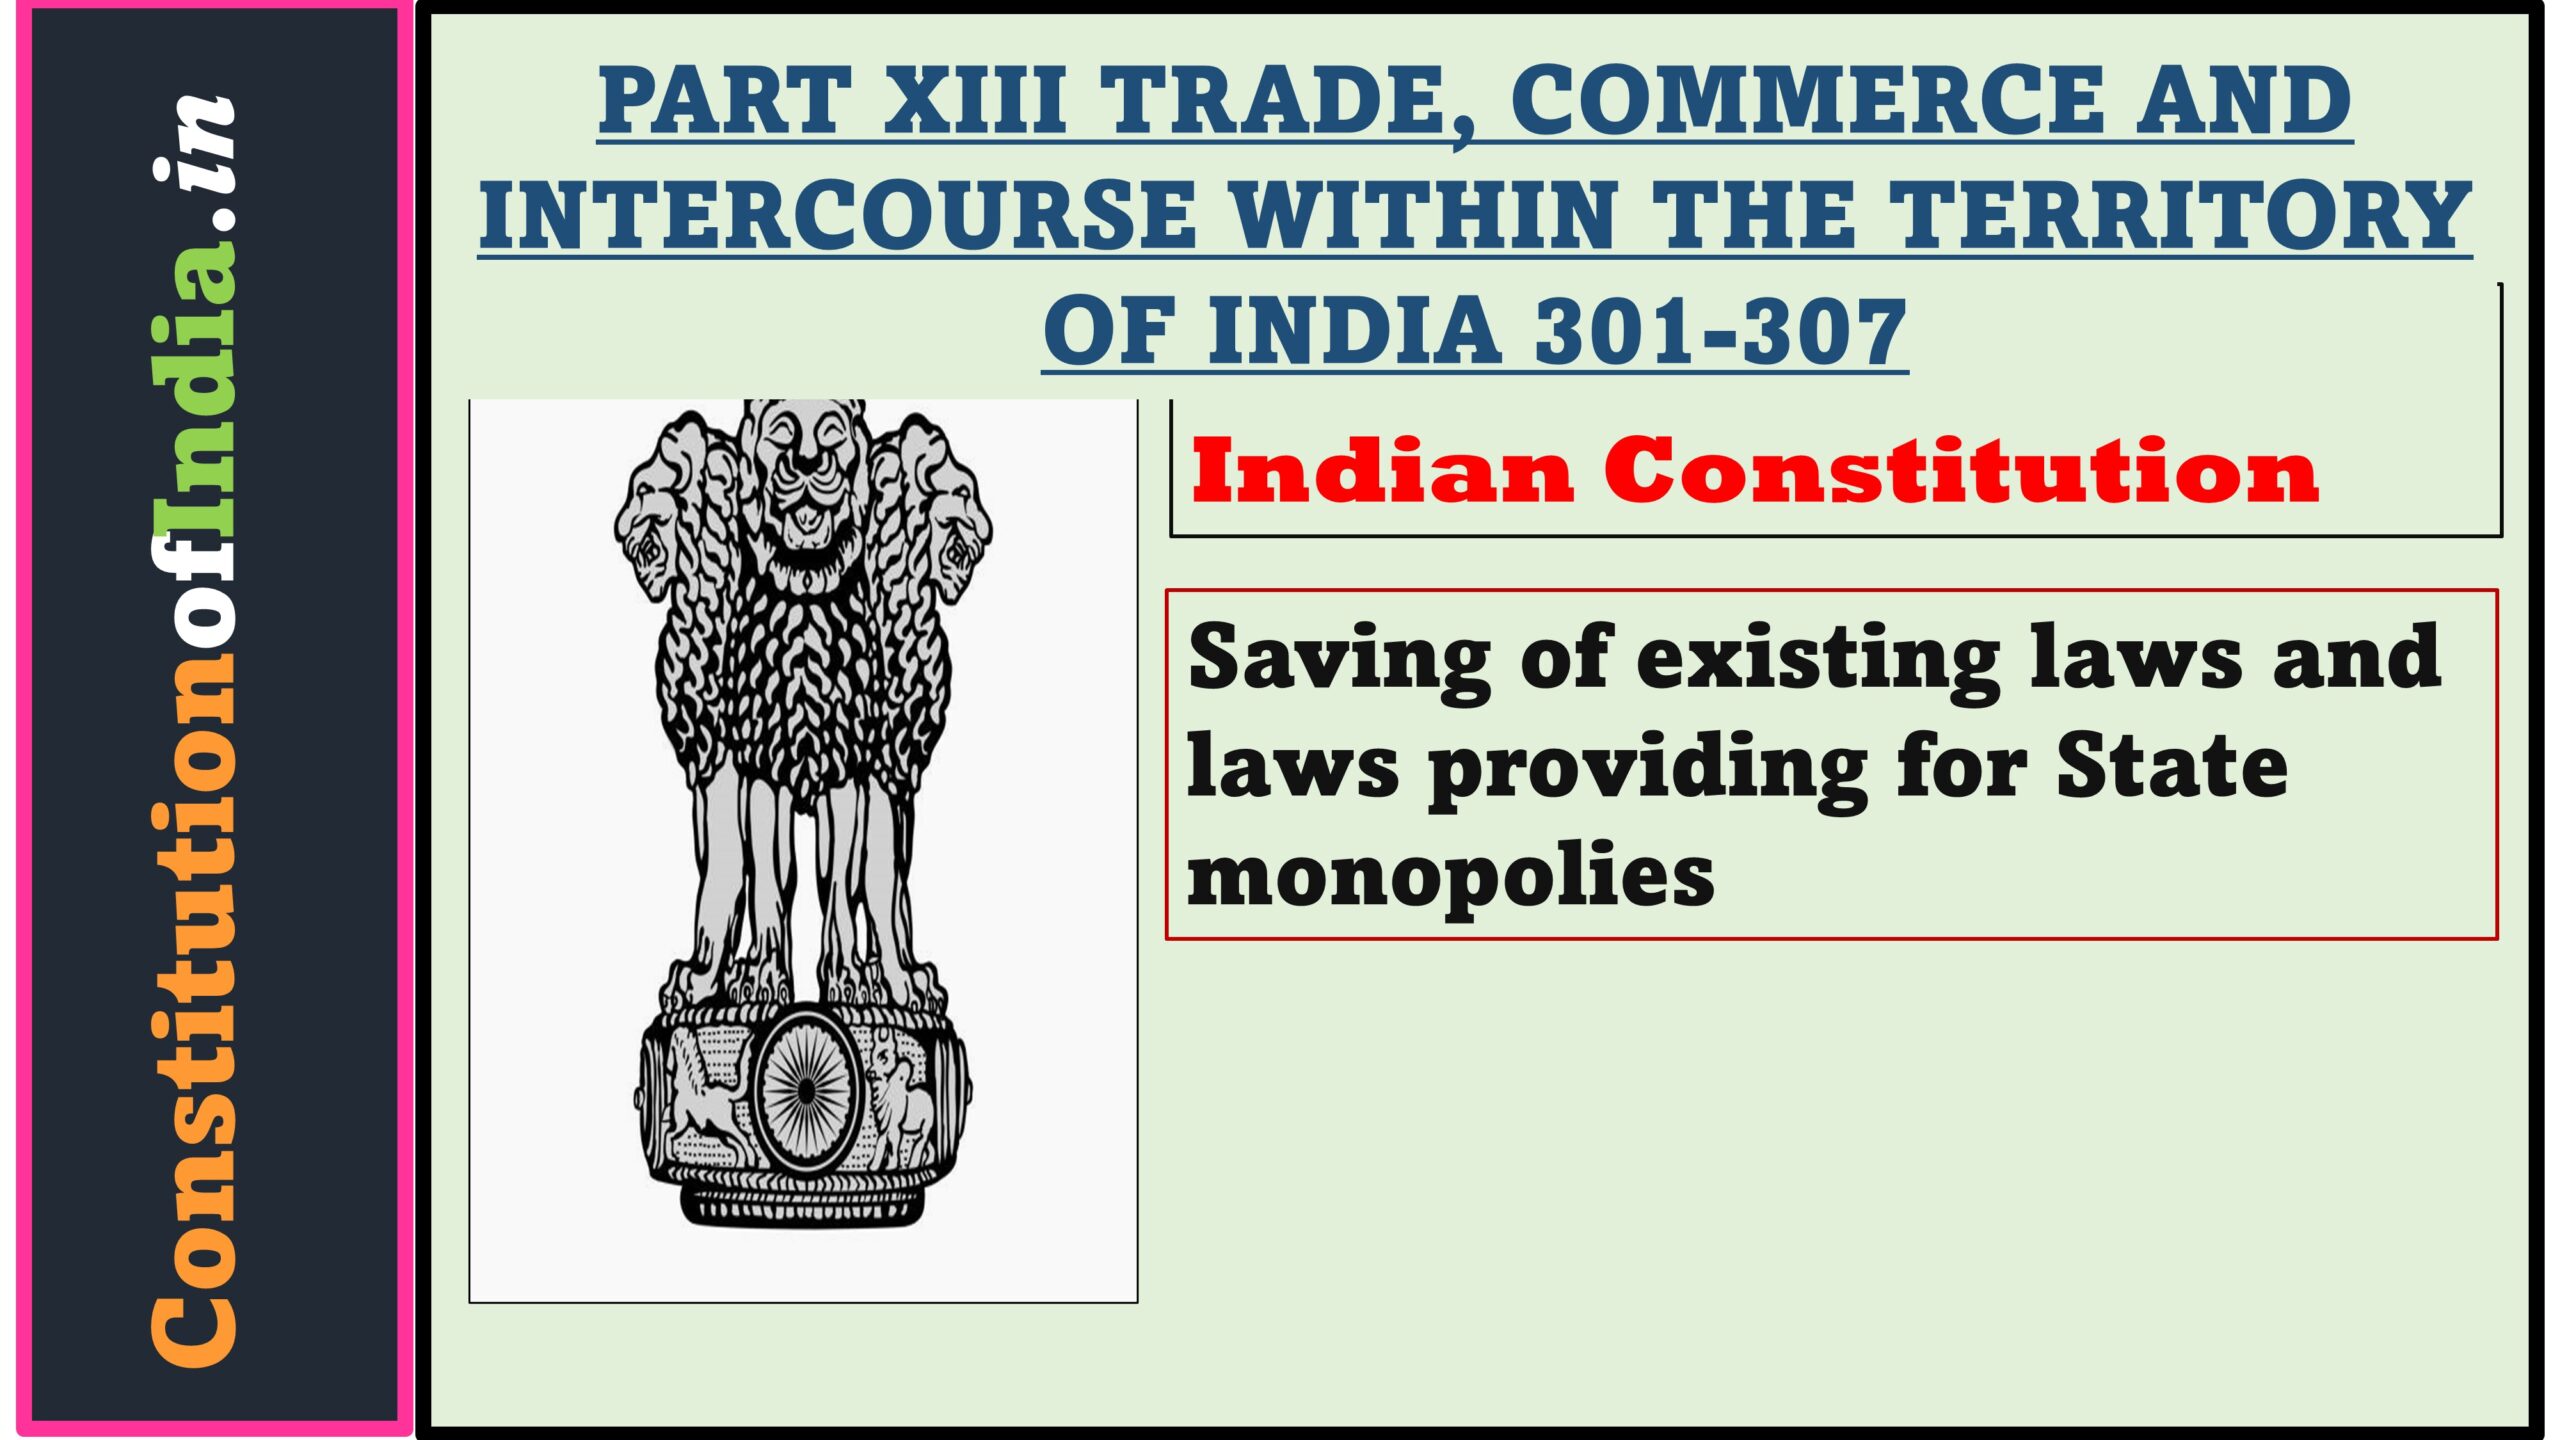 Article 305 of The Indian Constitution